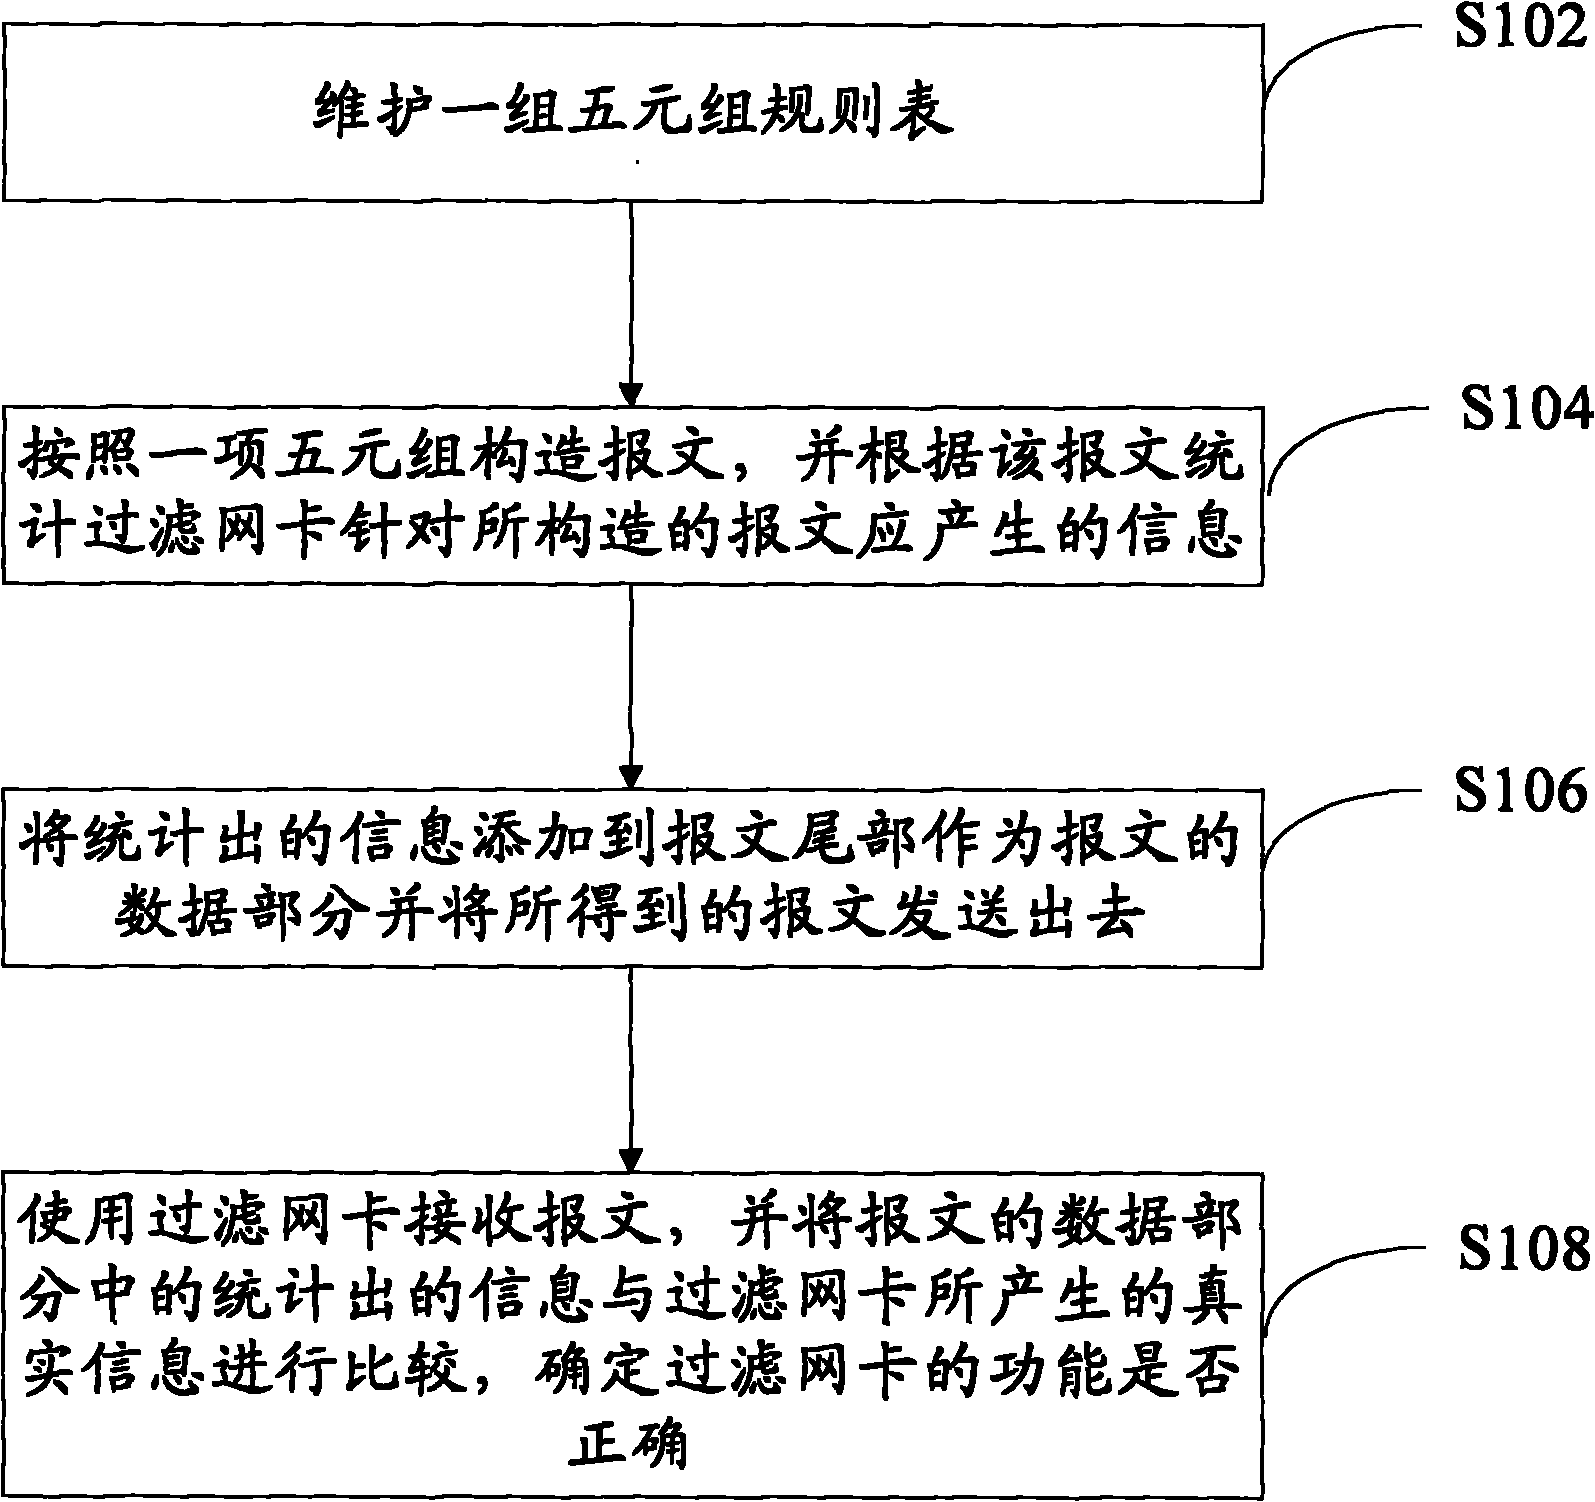 Automated testing method and system for filter network card